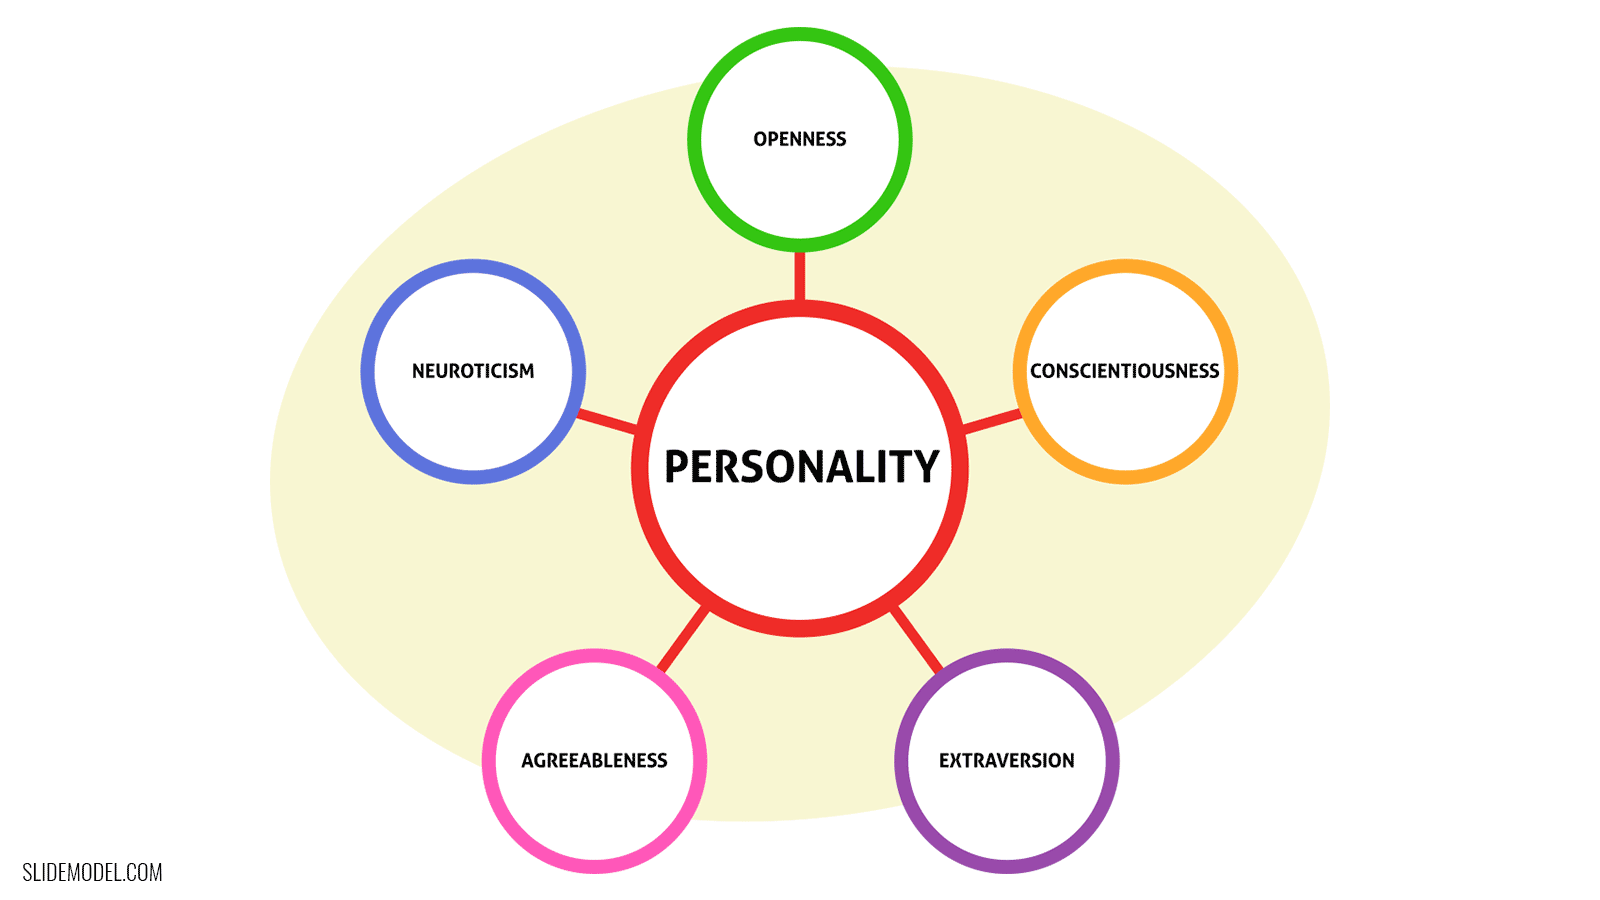 corporate personality examples